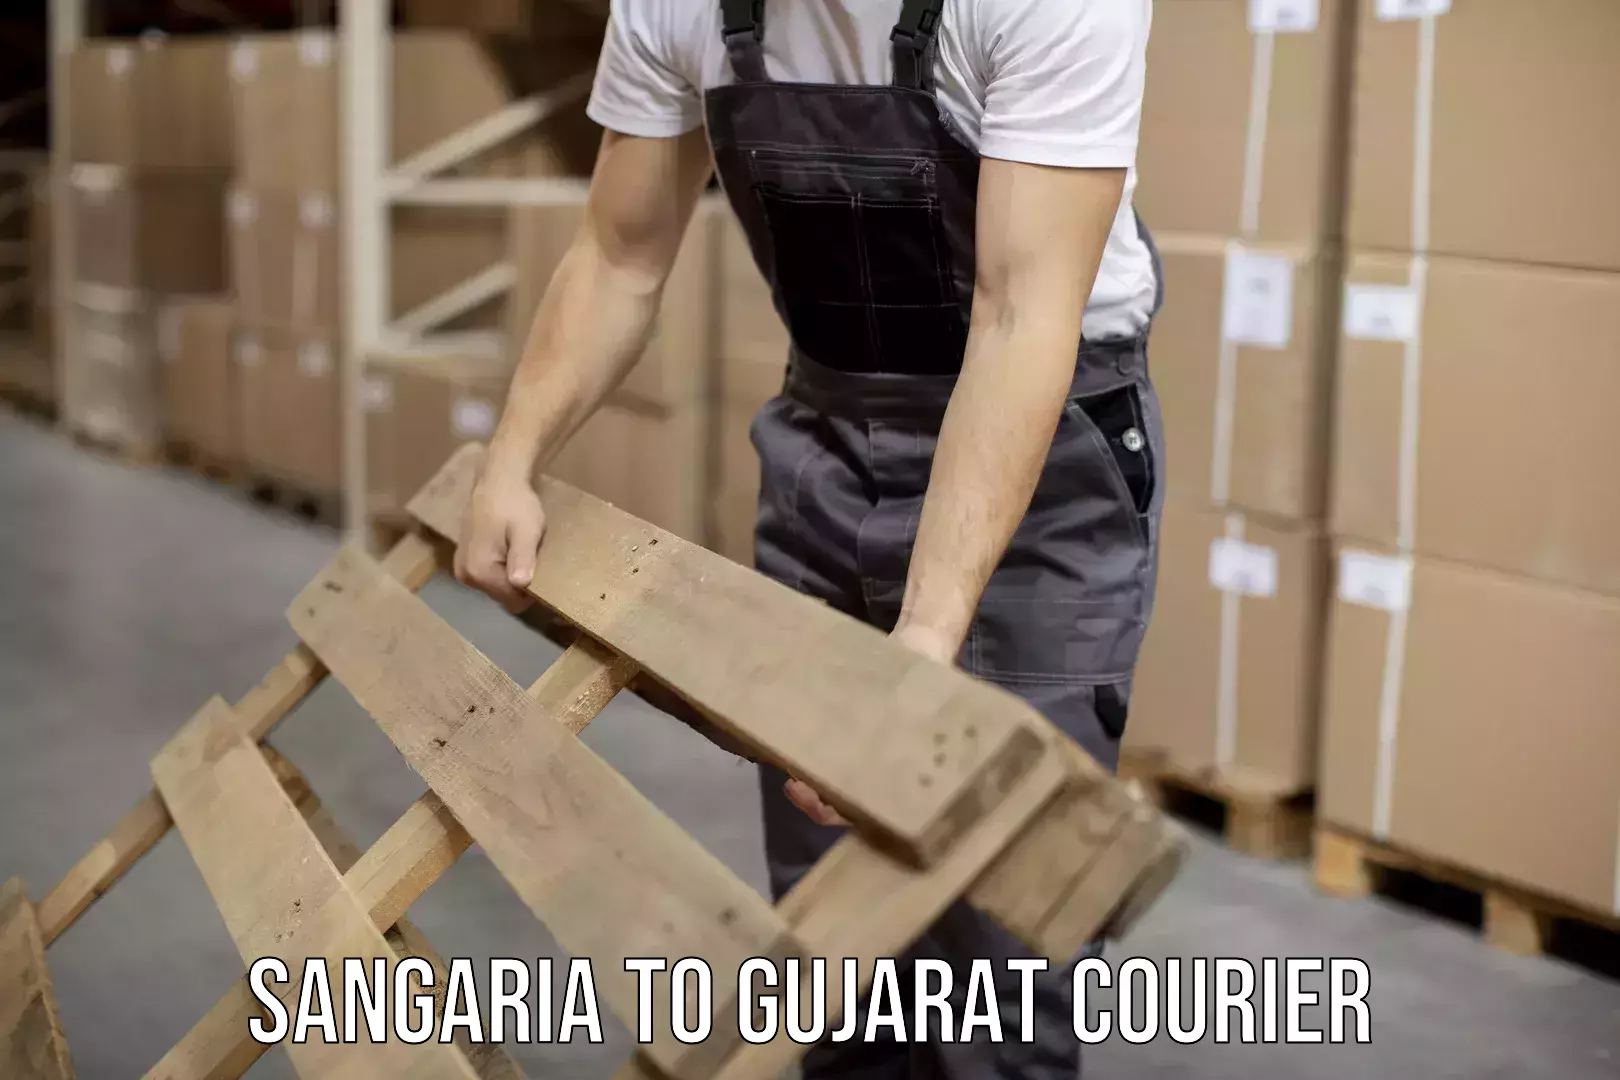 Professional courier handling Sangaria to Ahmedabad